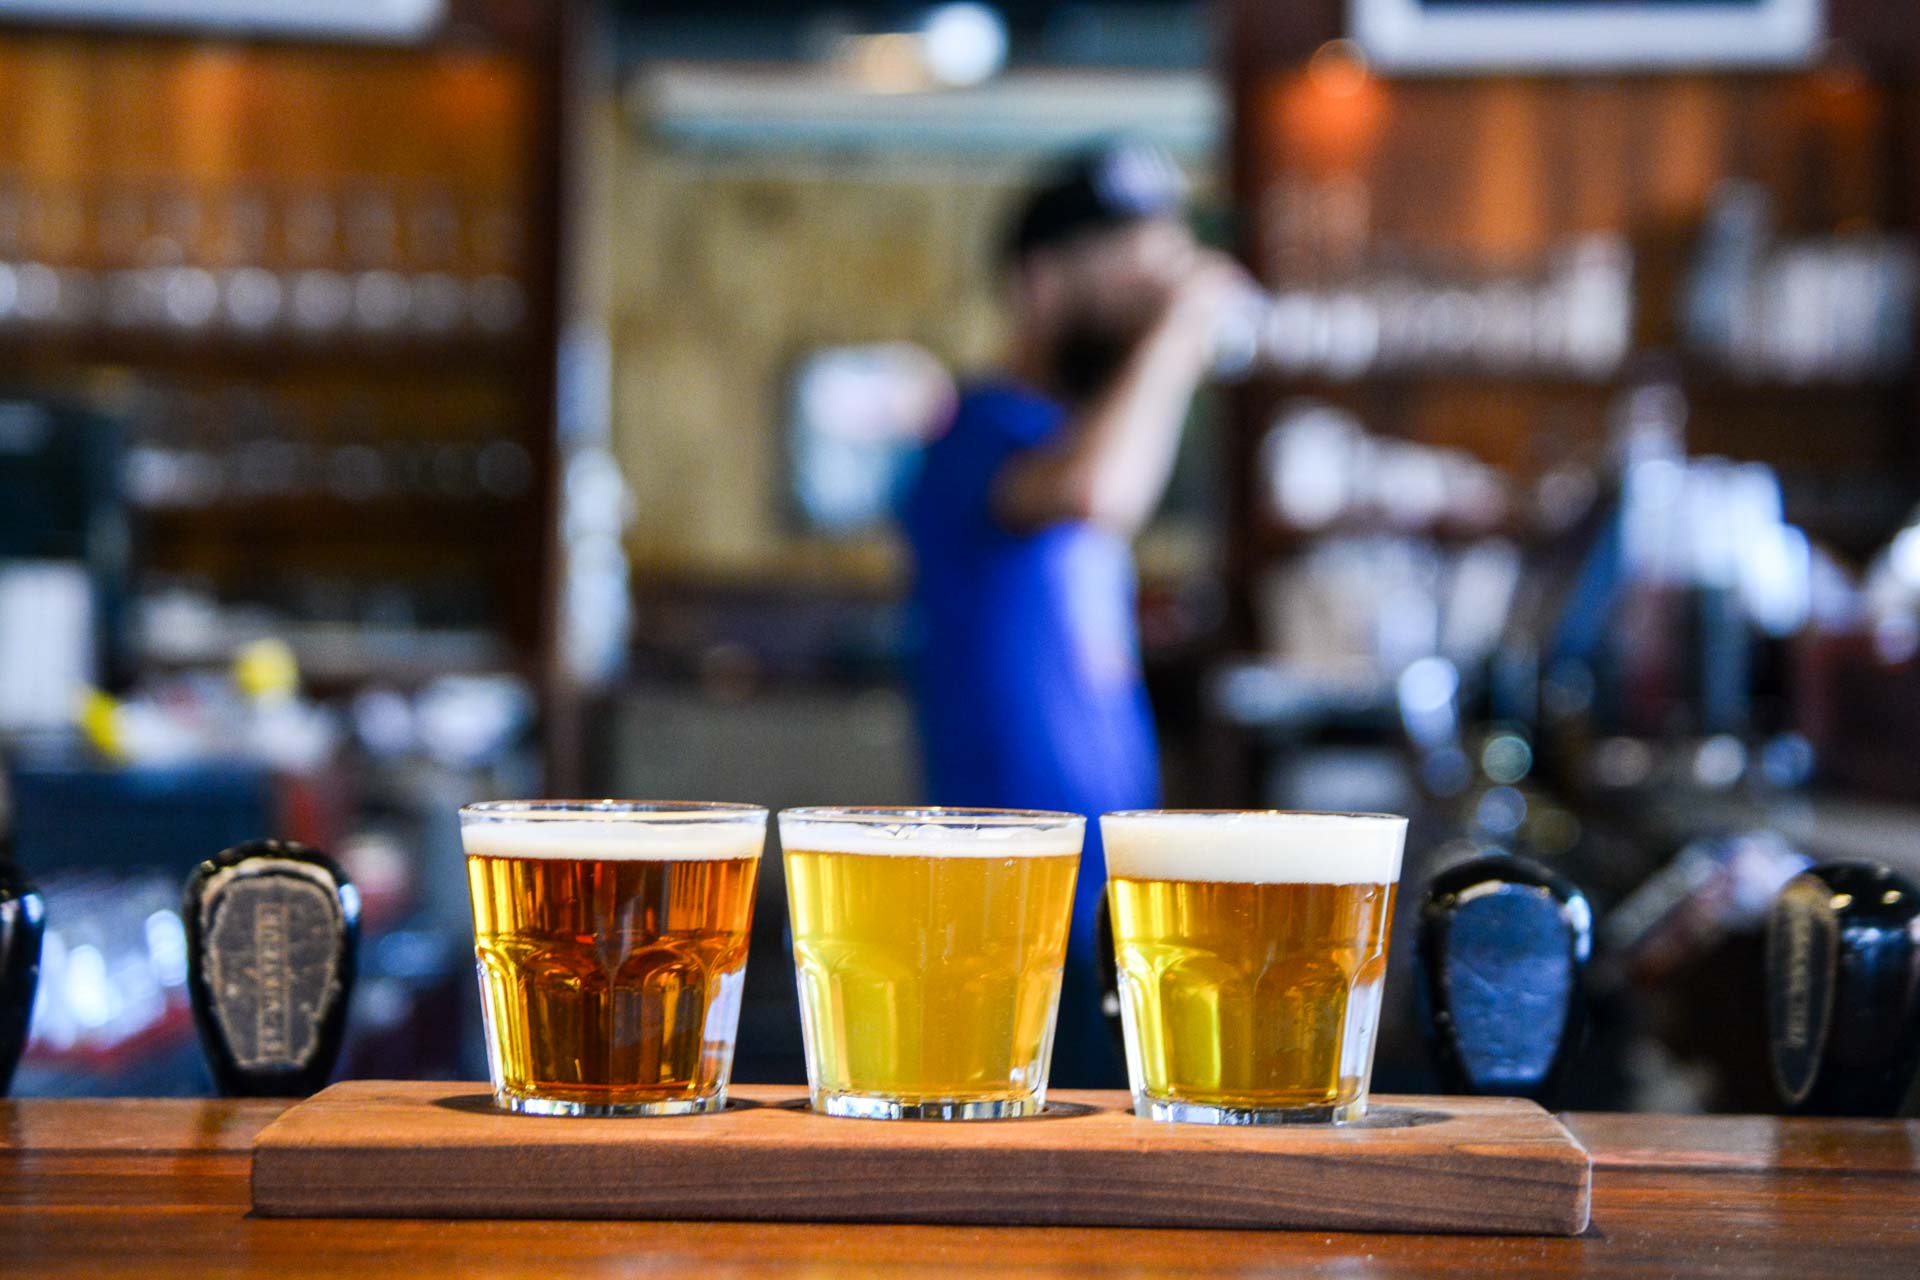 Montreal Craft Beer Guide An Entry Point to Quebec's Epic Beer Scene